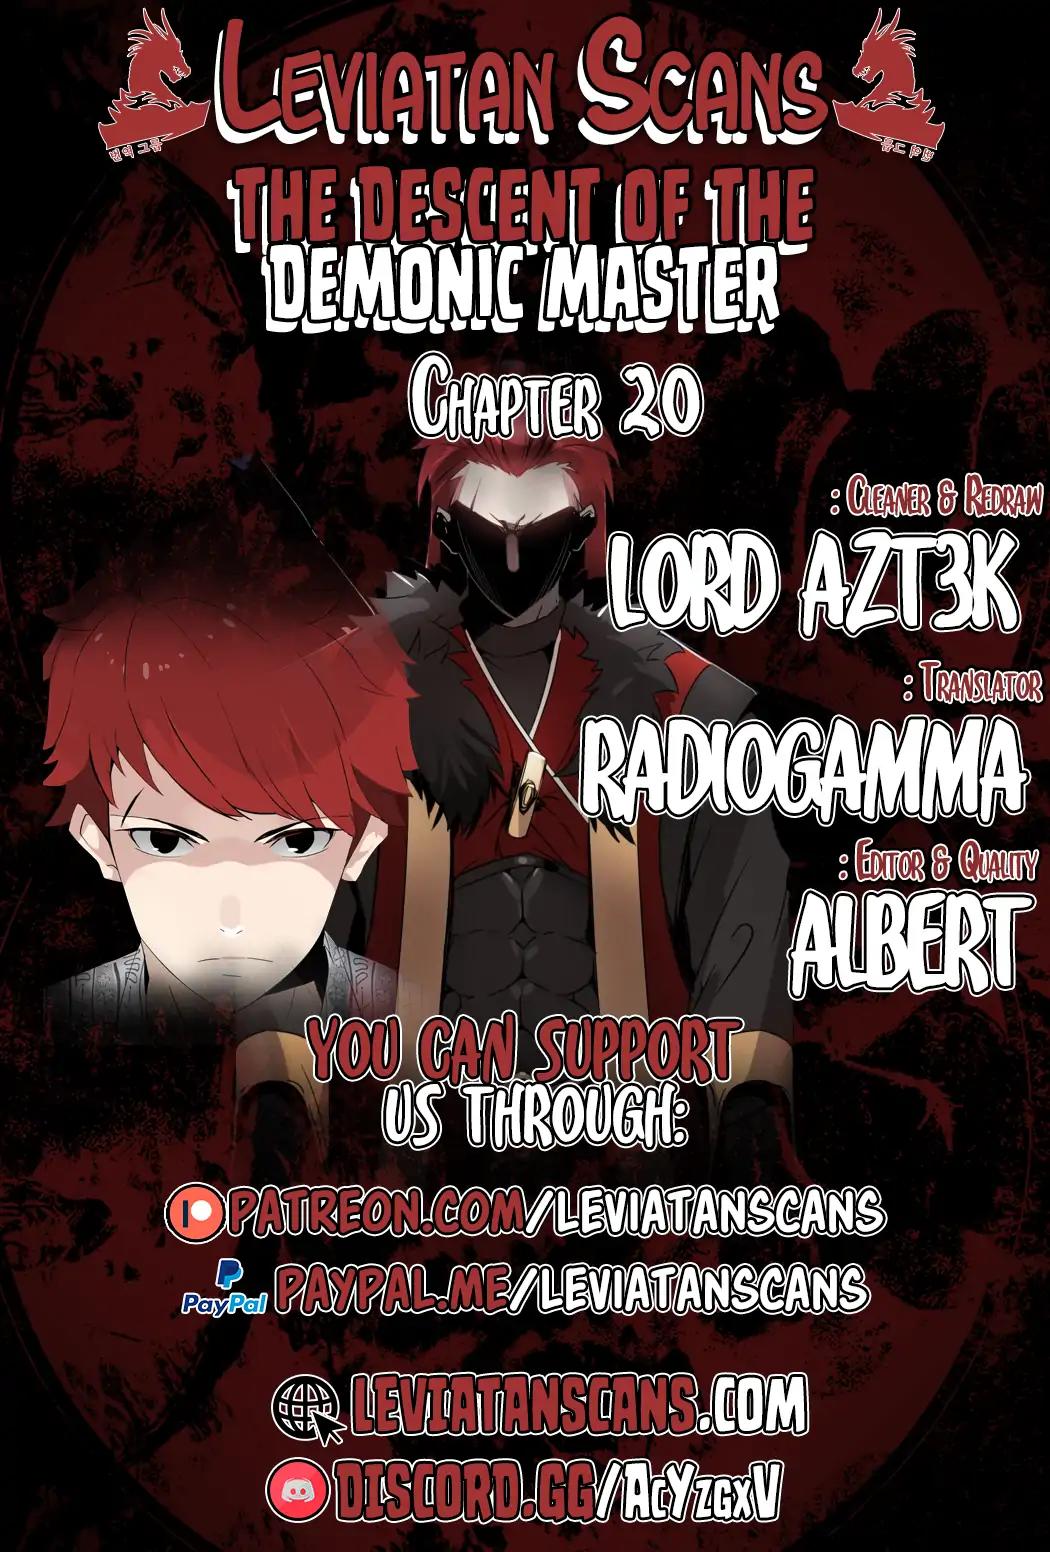 The Descent of the Demonic Master Chapter 20